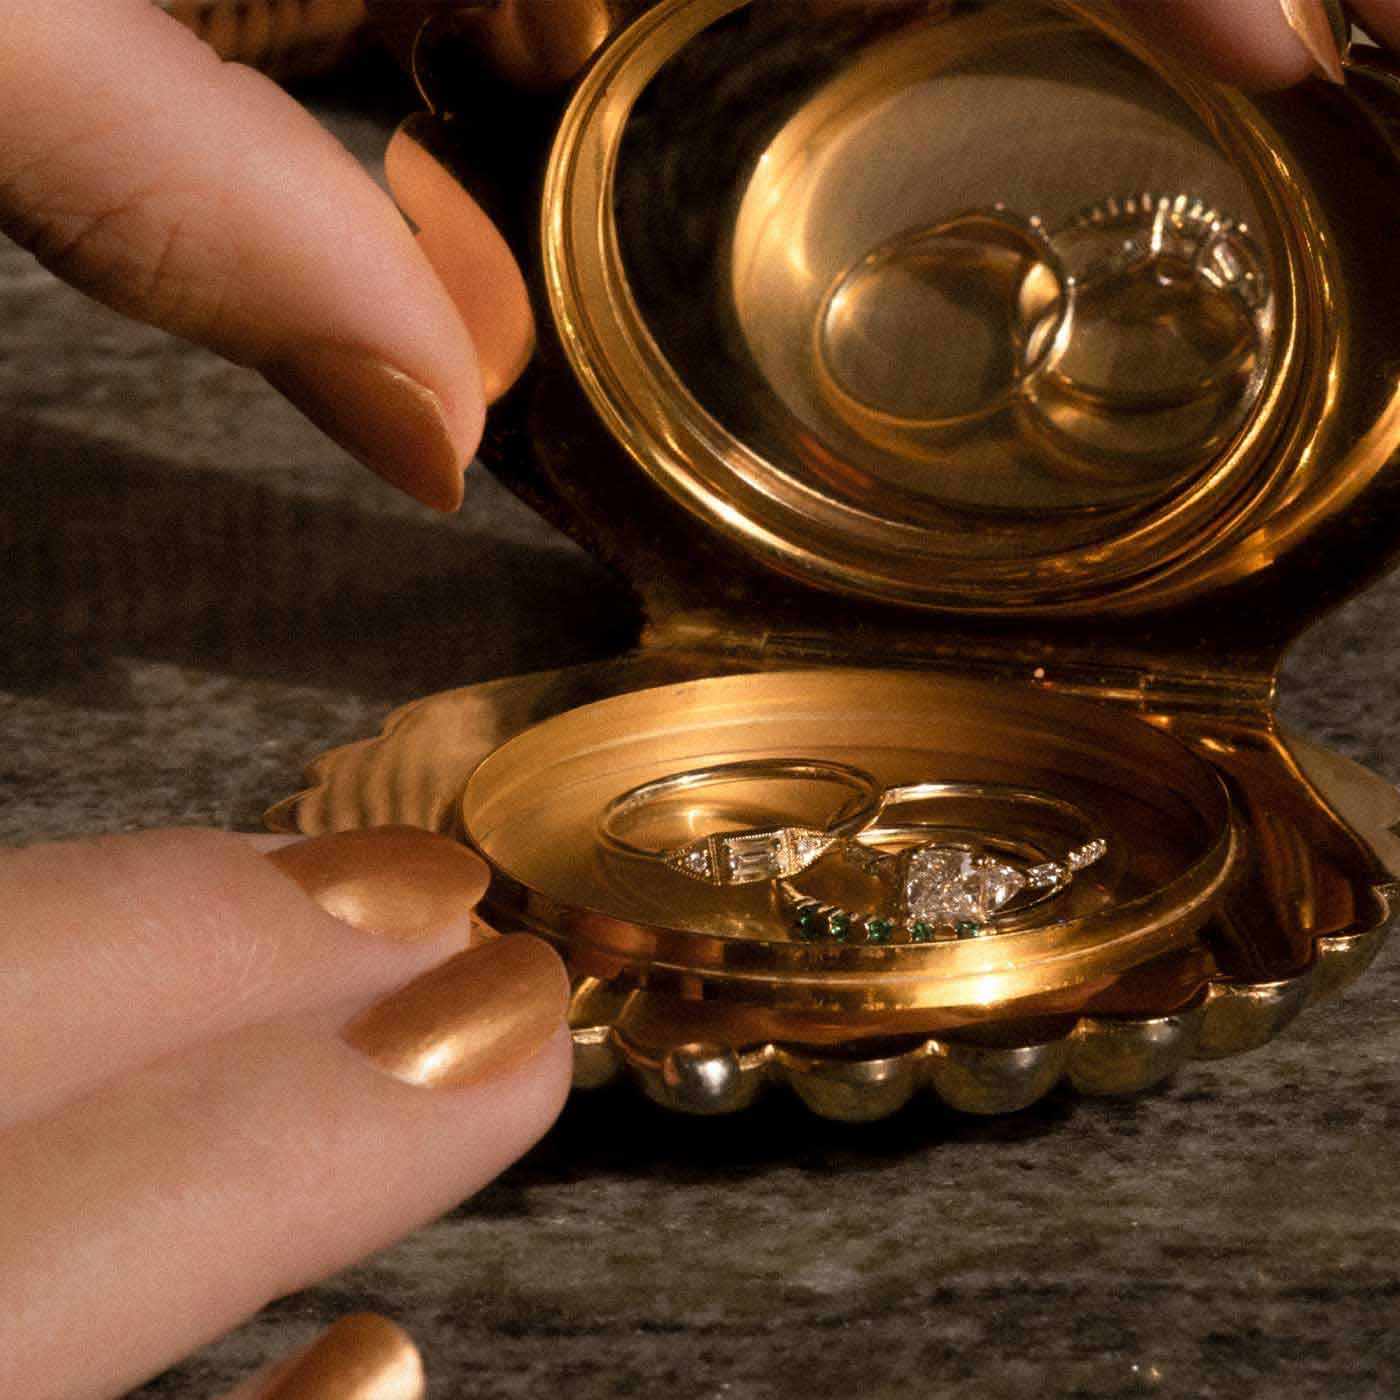 Hands and Rings in Gold Dish